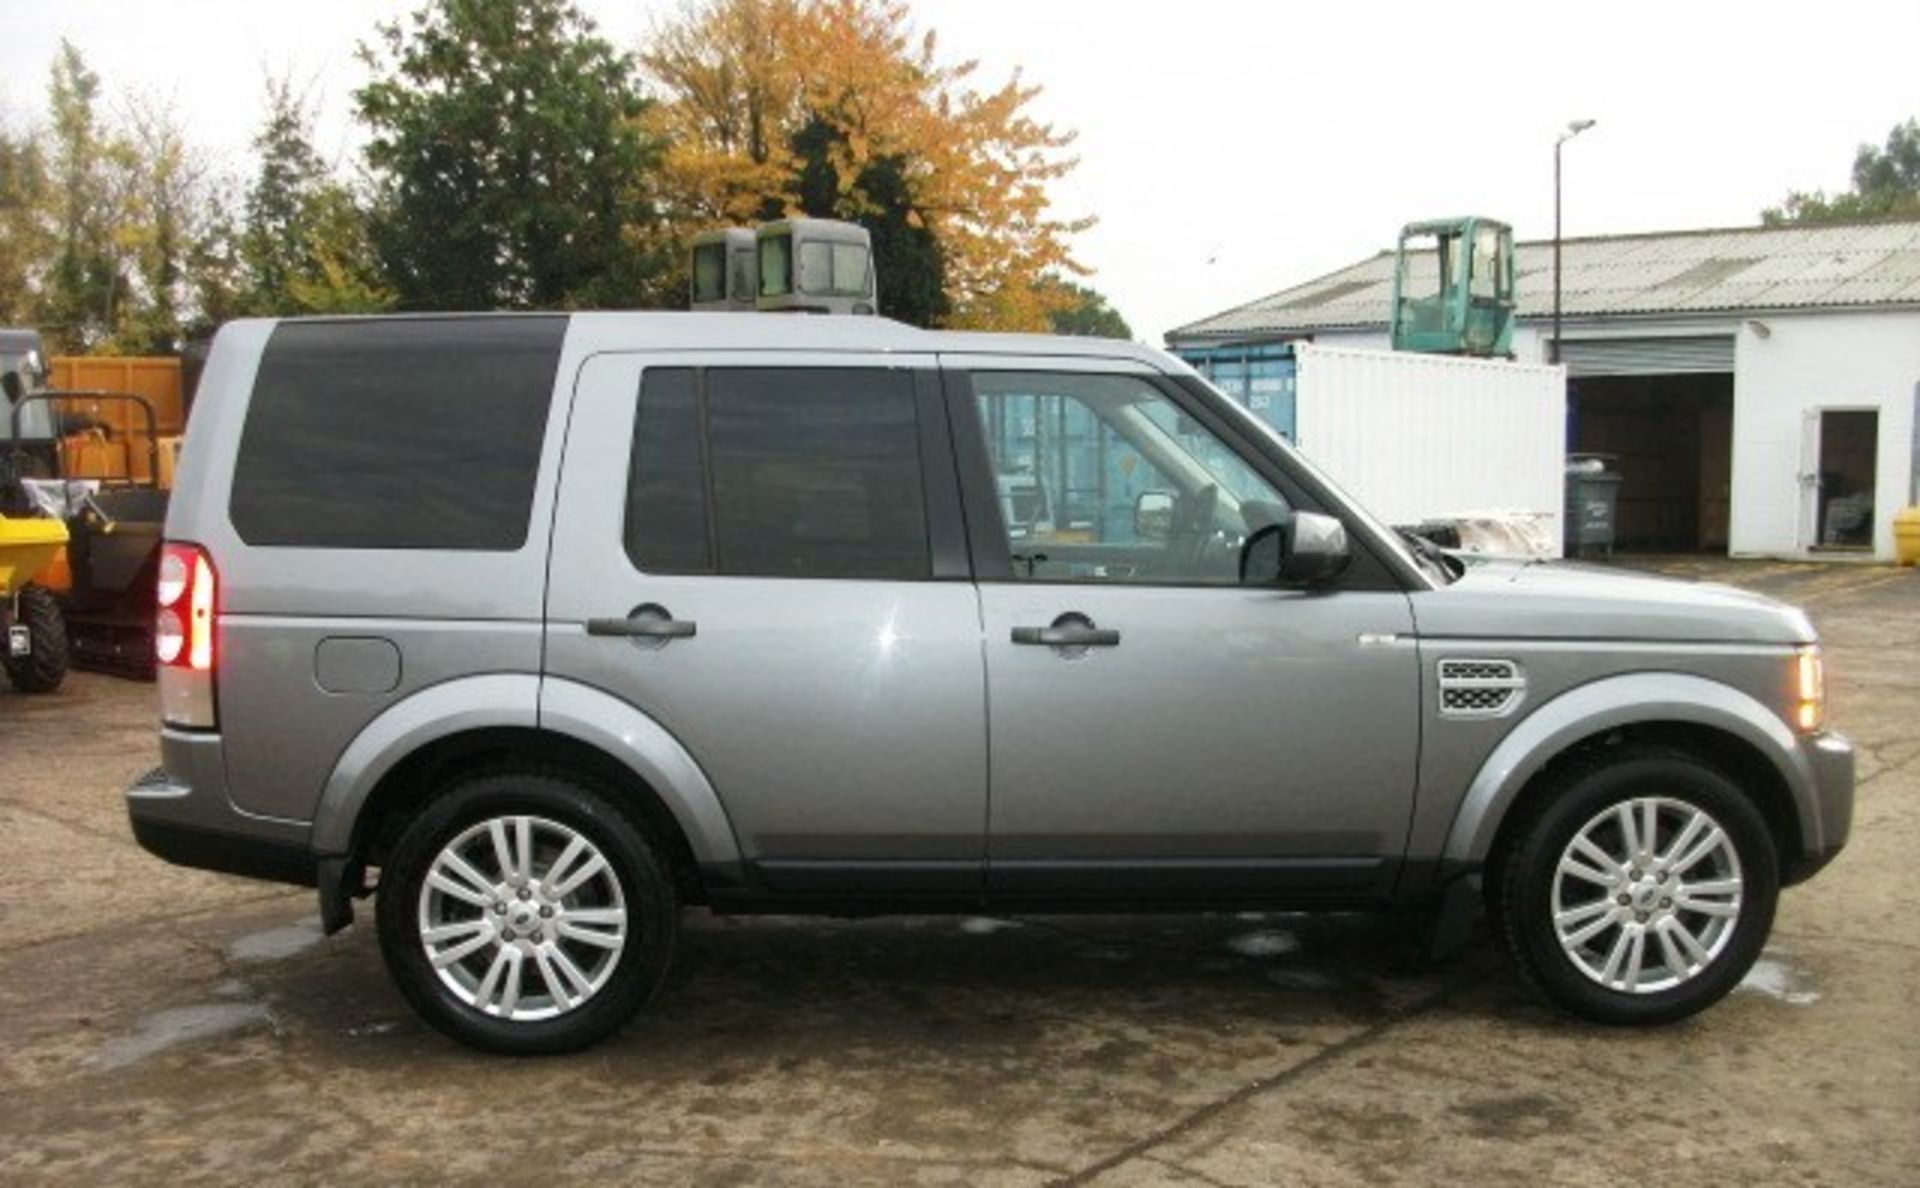 LAND ROVER DISCOVERY SDV6 AUTO 255 - 2993cc
Body: 4 Dr 4x4
Color: Grey
First Reg: 26/04/2013 - Image 24 of 29